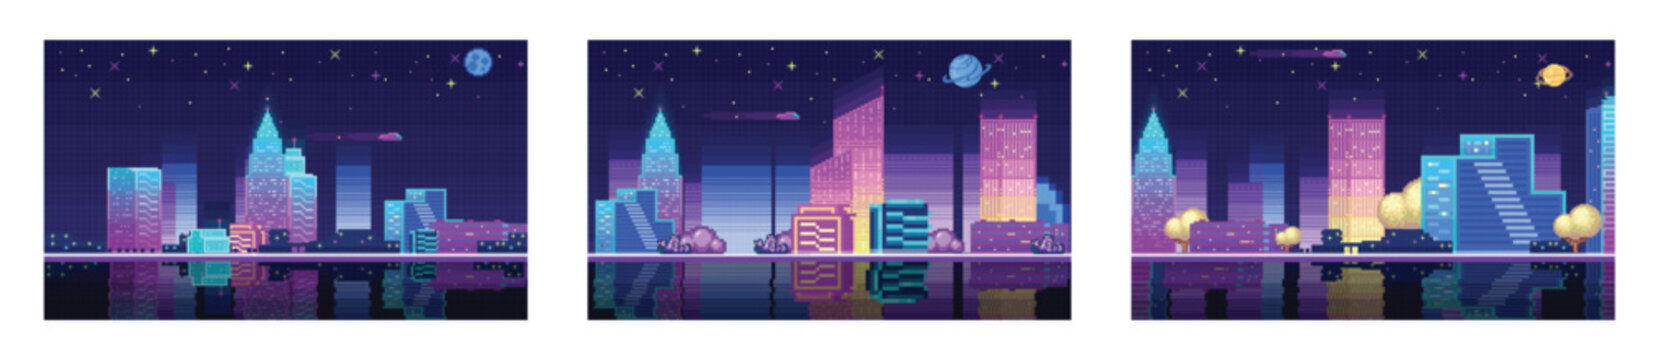 Neon lights and dark theme city. Chinese 8 bit city, arcade, poster. Bright colorful, illuminated street, city landscape. Cityscape. Pixel art style, cyberpunk city scene, night time with neon lights